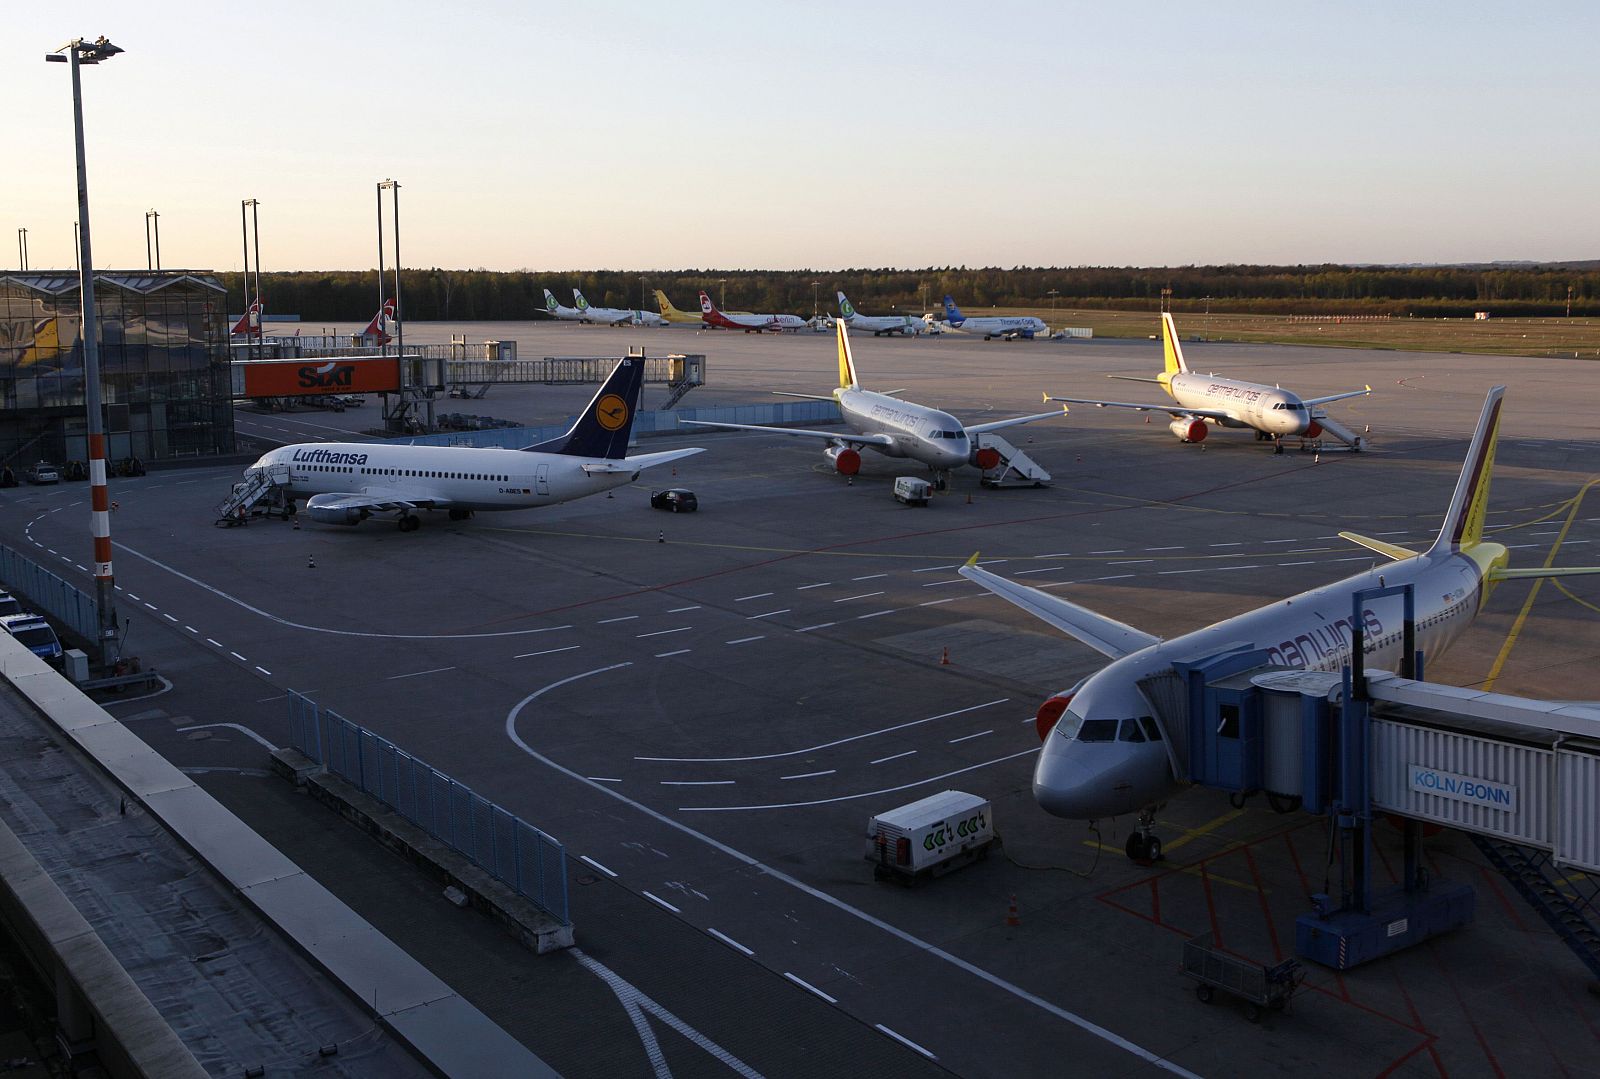 Planes are parked on the tarmac of the closed Cologne-Bonn airport